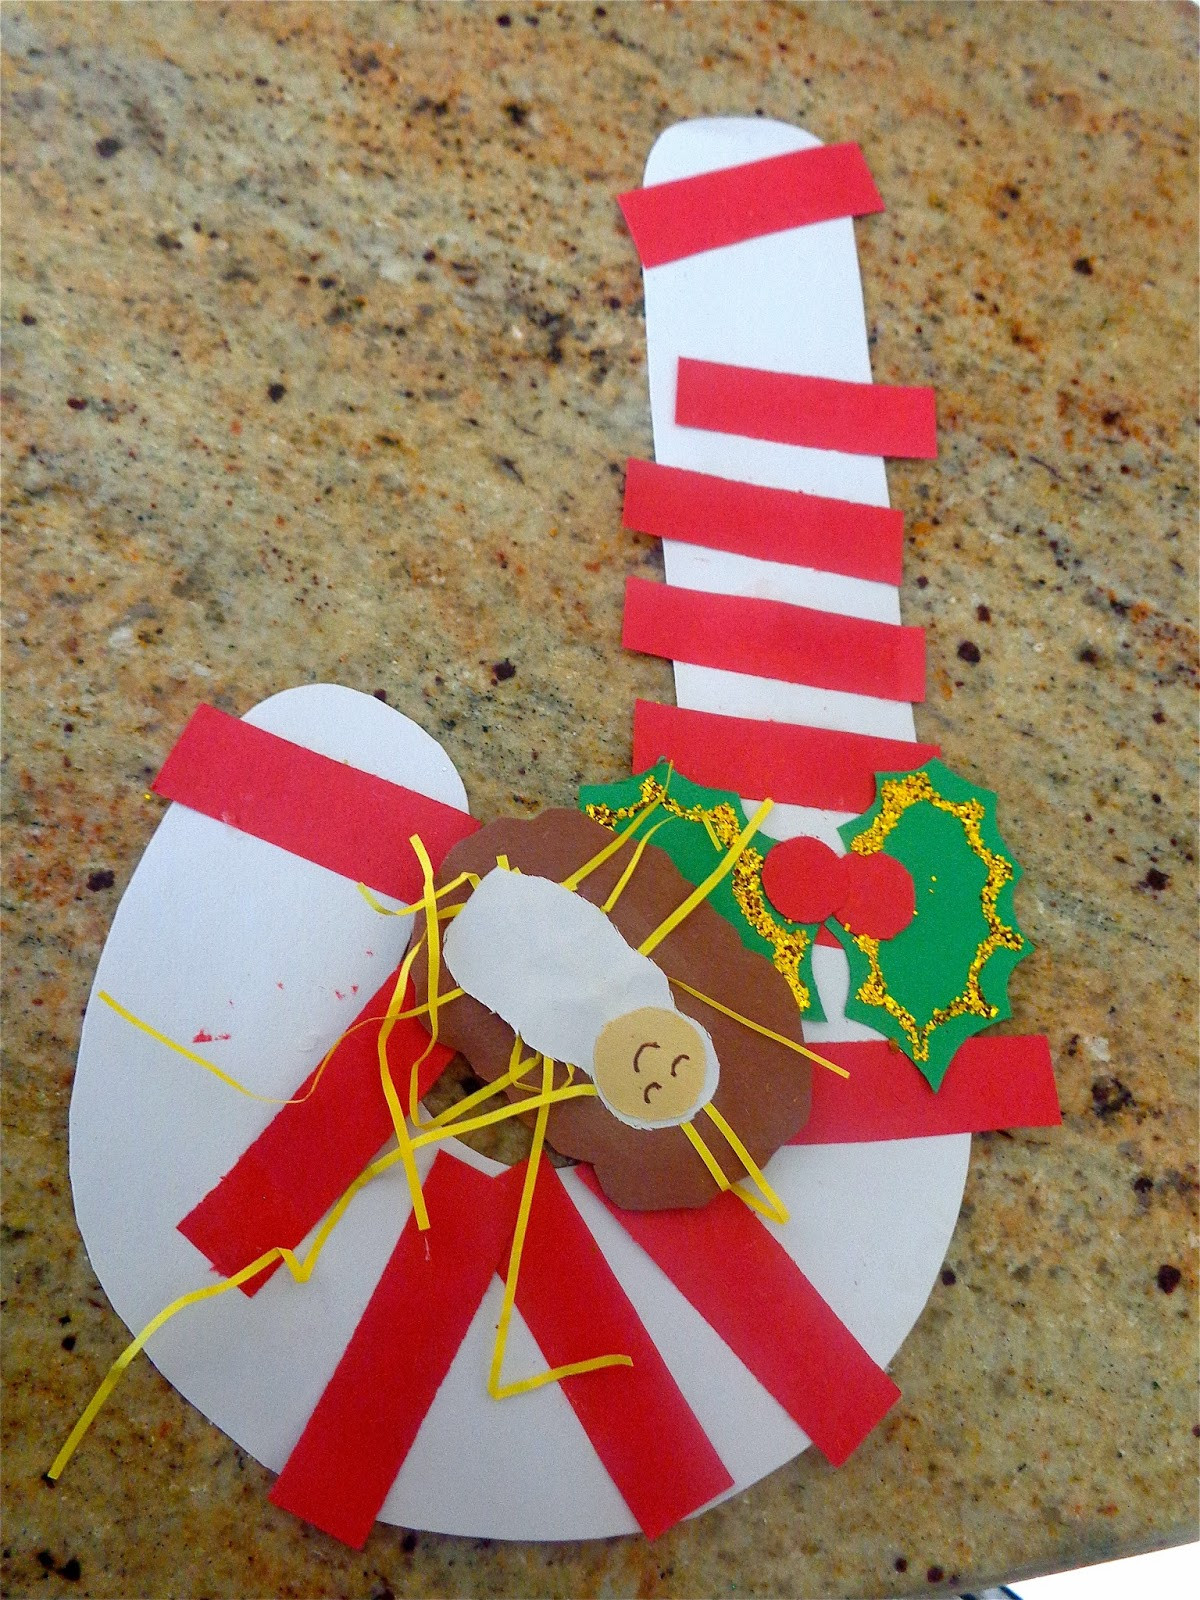 A Crafts For Preschoolers
 Terrific Preschool Years Christmas time